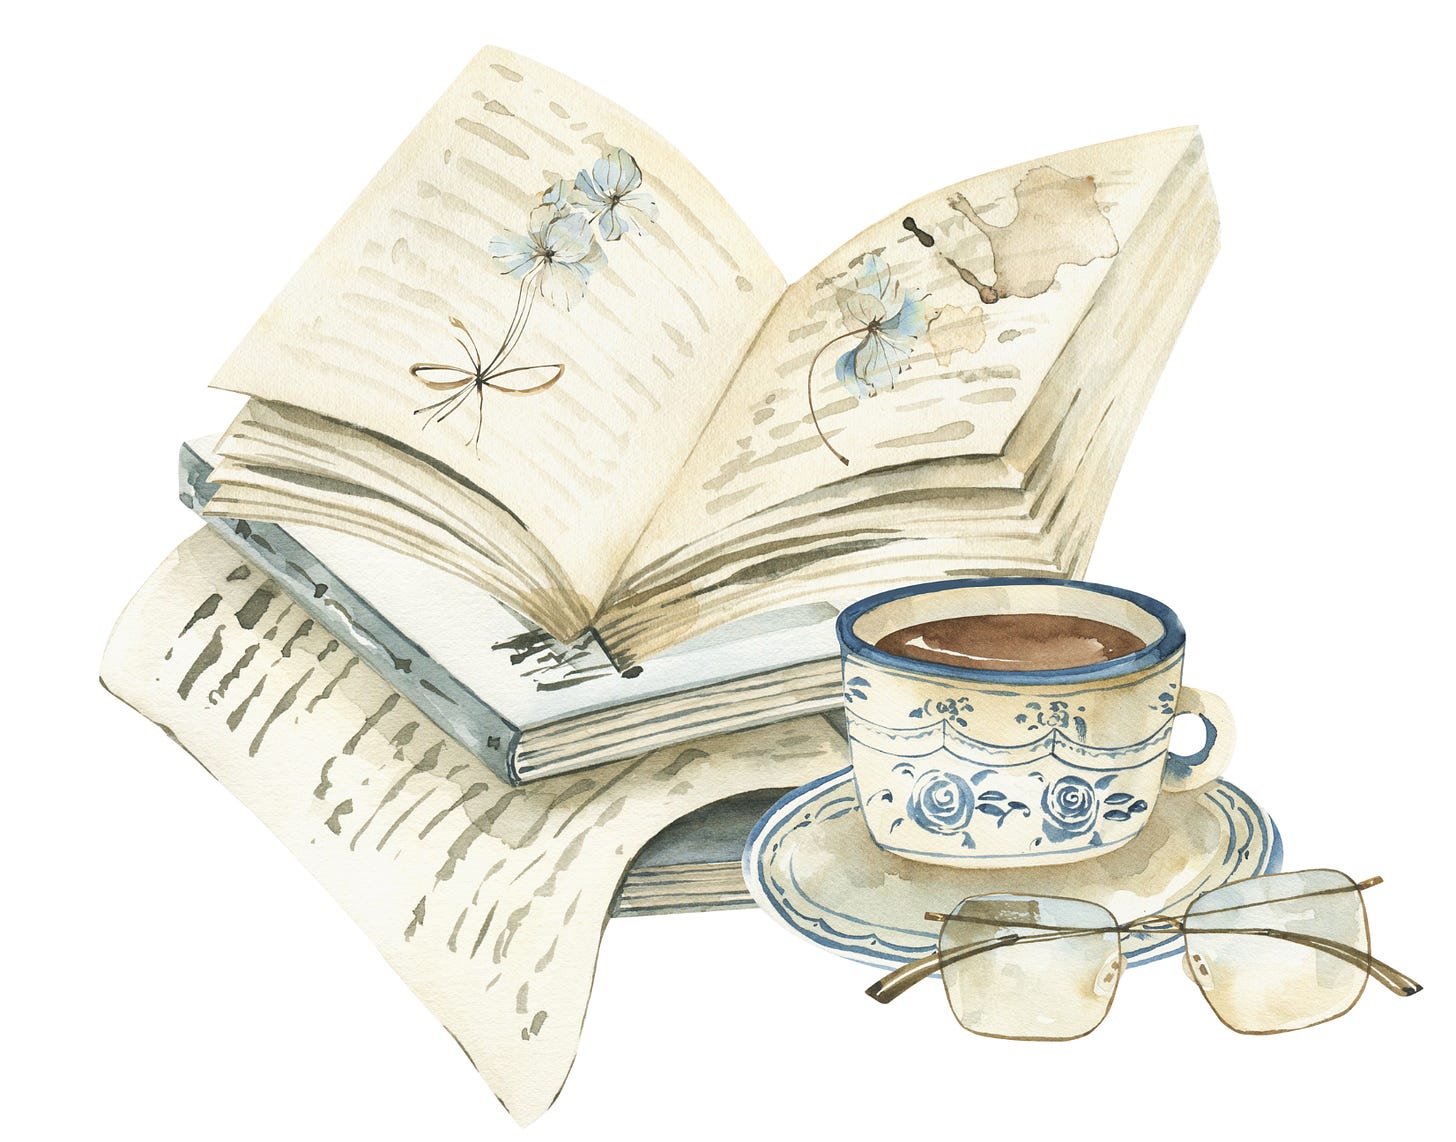 Watercolor books, journals, glasses, and tea painted with ivory and blue